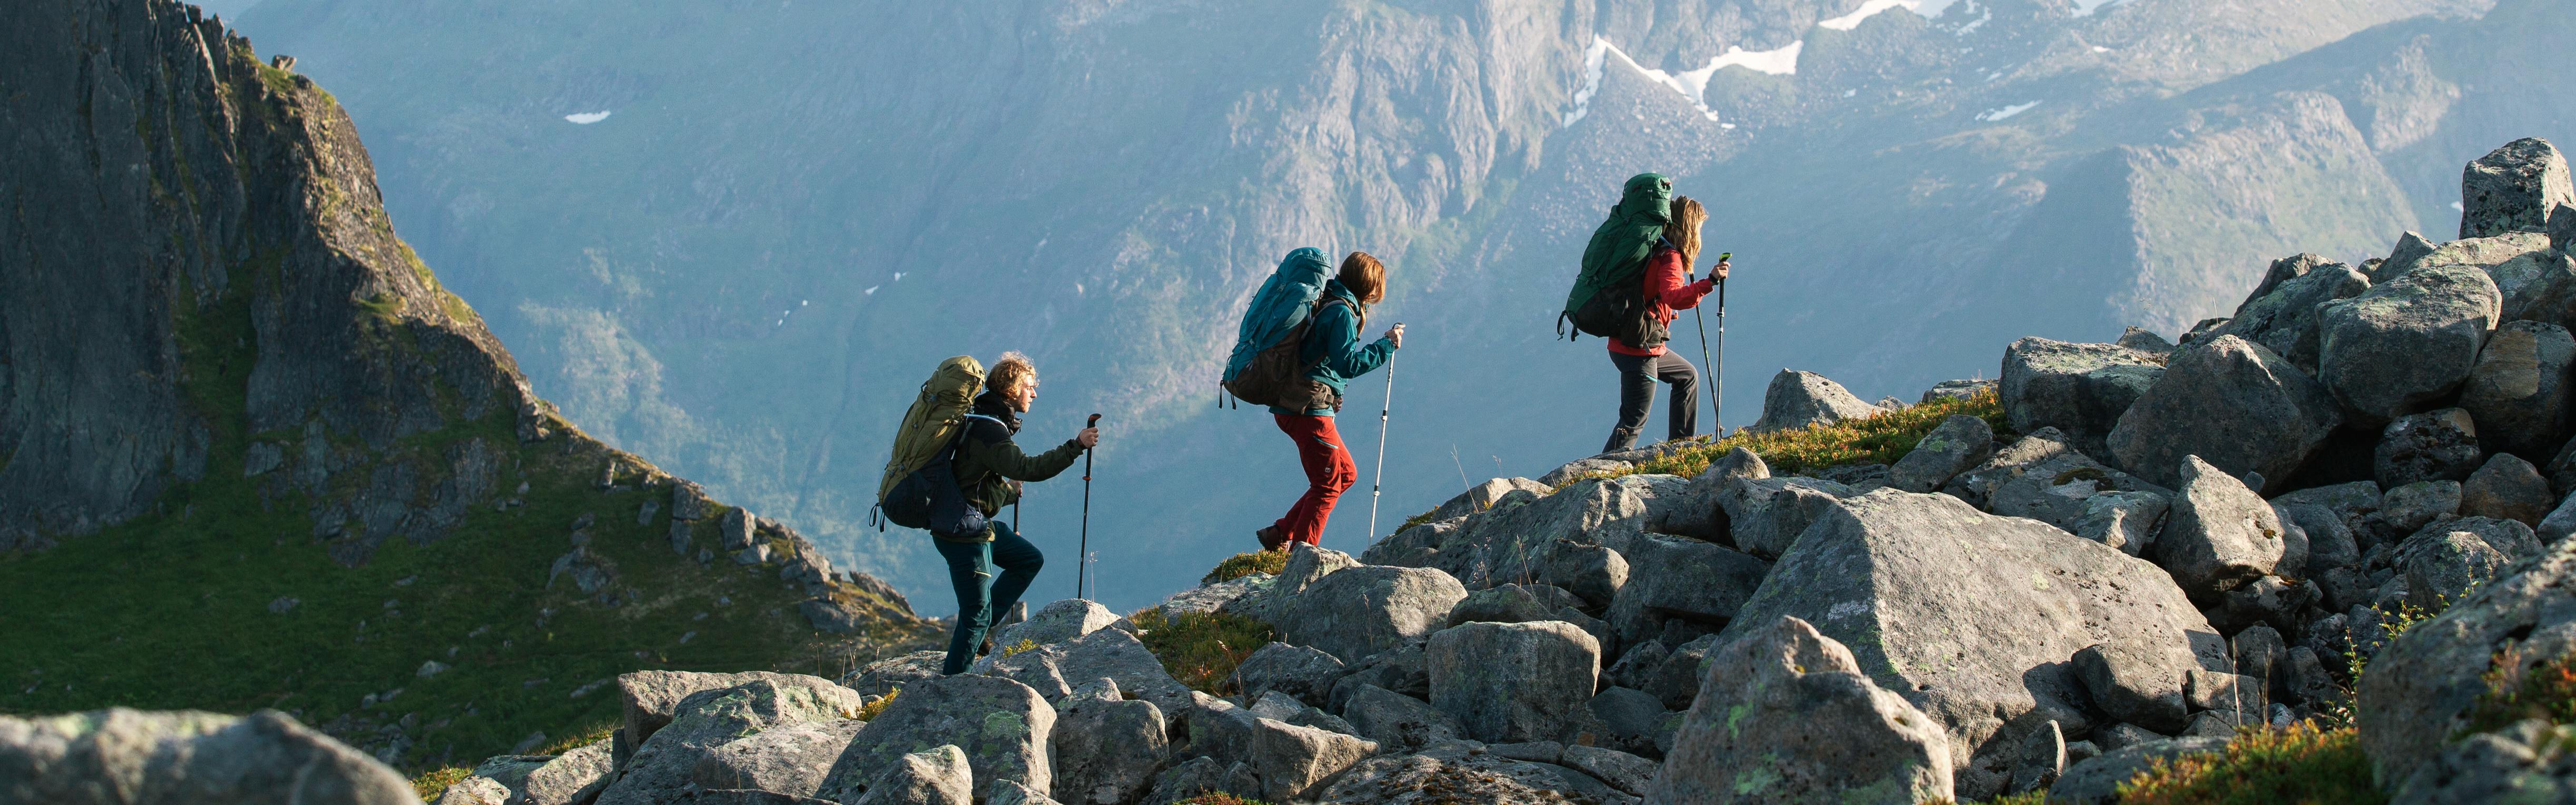 Three people backpack up a hill covered in boulders. They all wear large Deuter backpacks and carry hiking poles.